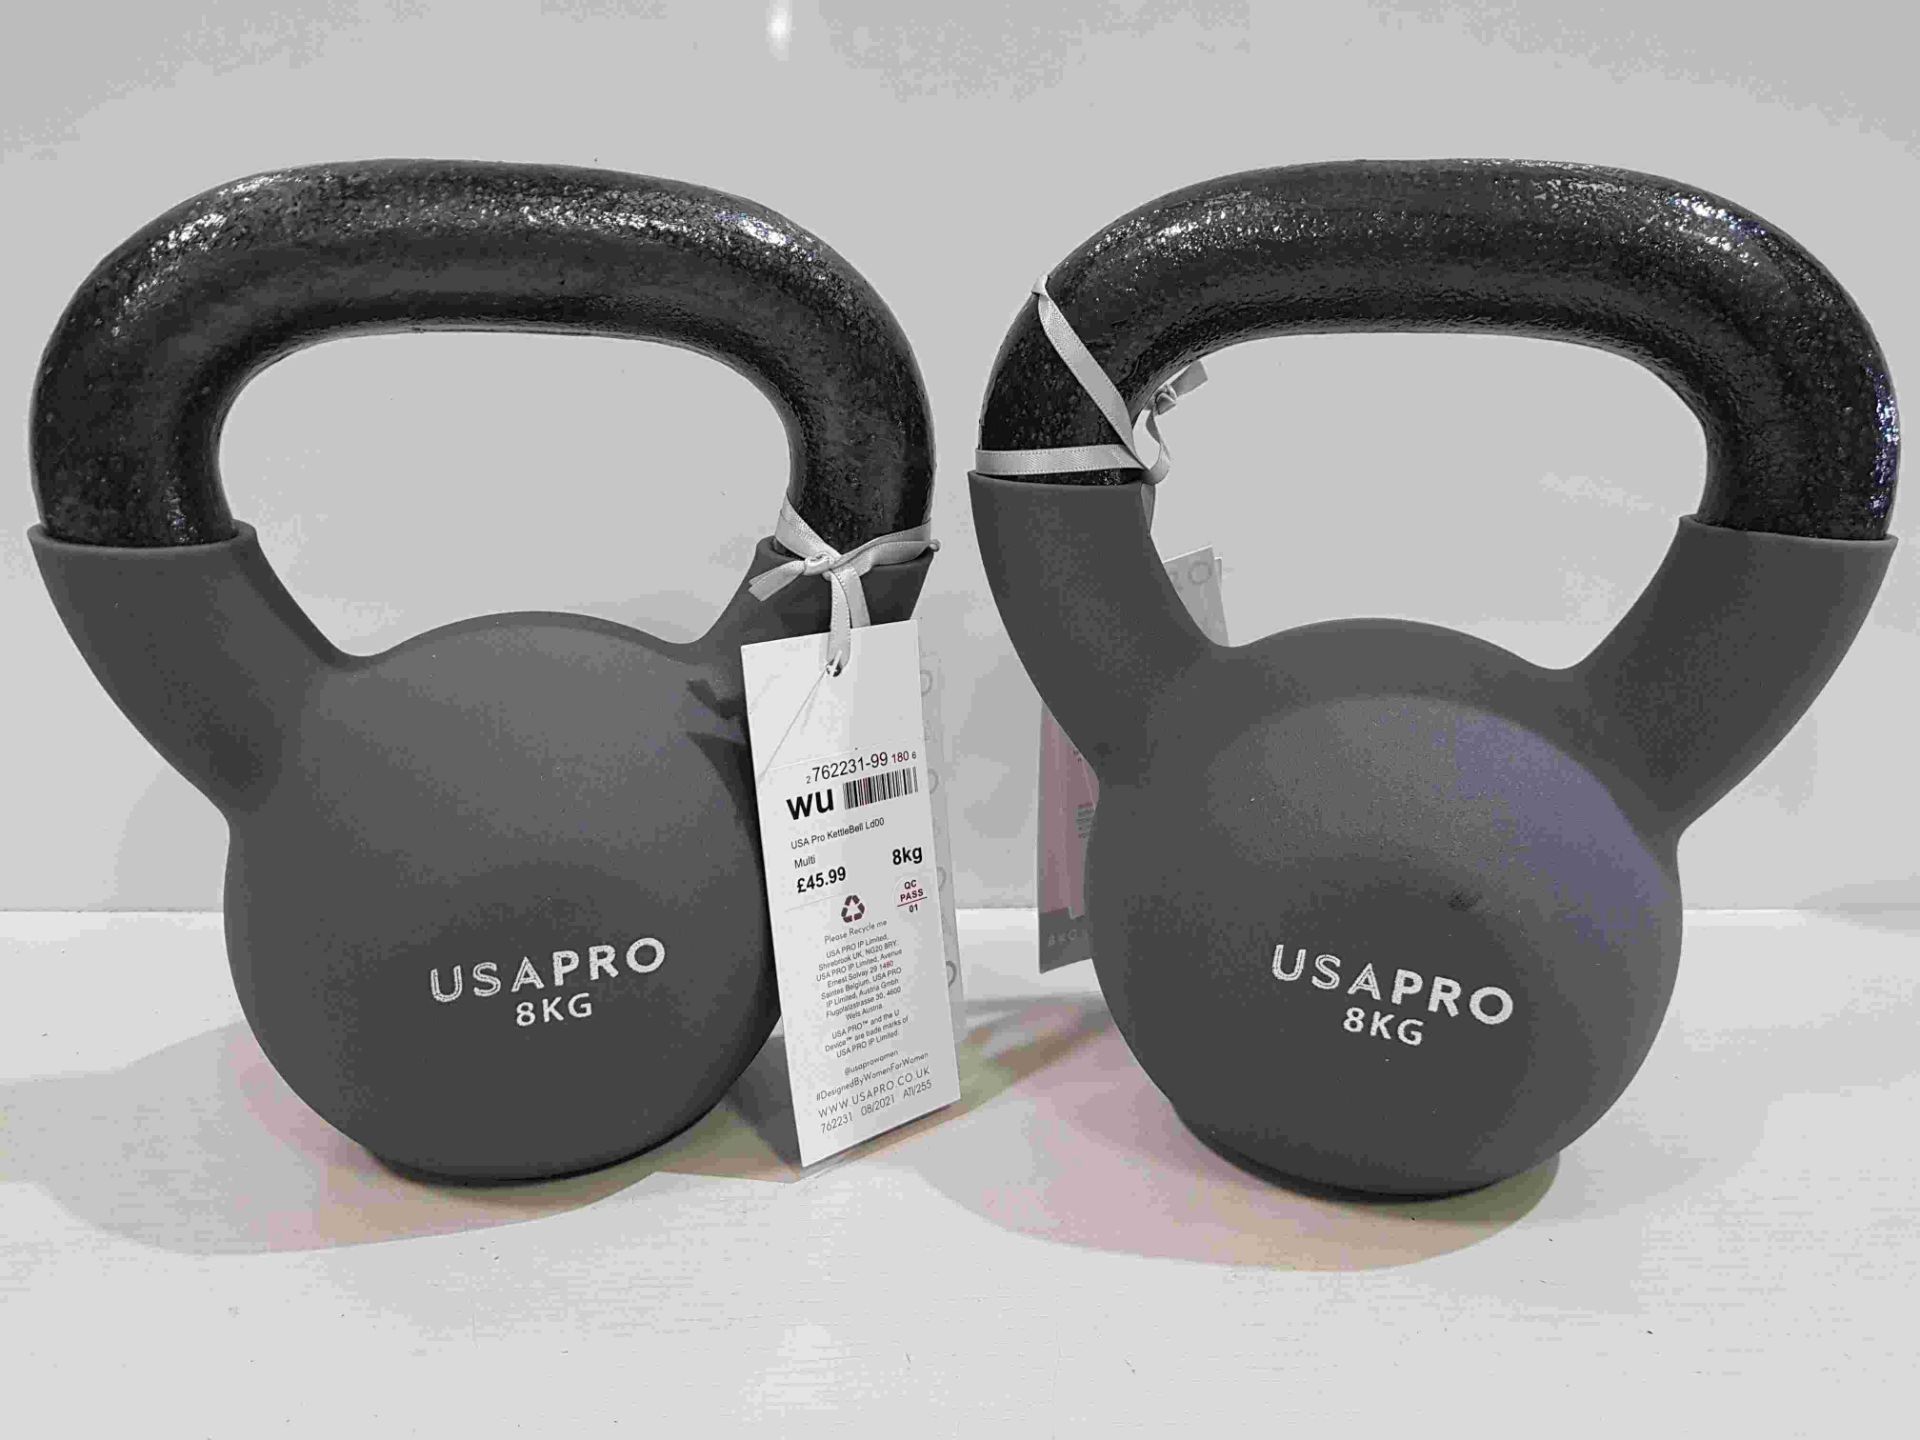 20 X BRAND NEW USA PRO 8 KG KETTLE BELL EXERCISE WEIGHTS (10 PAIRS) - RRP £45.99 PP £91.98 PER